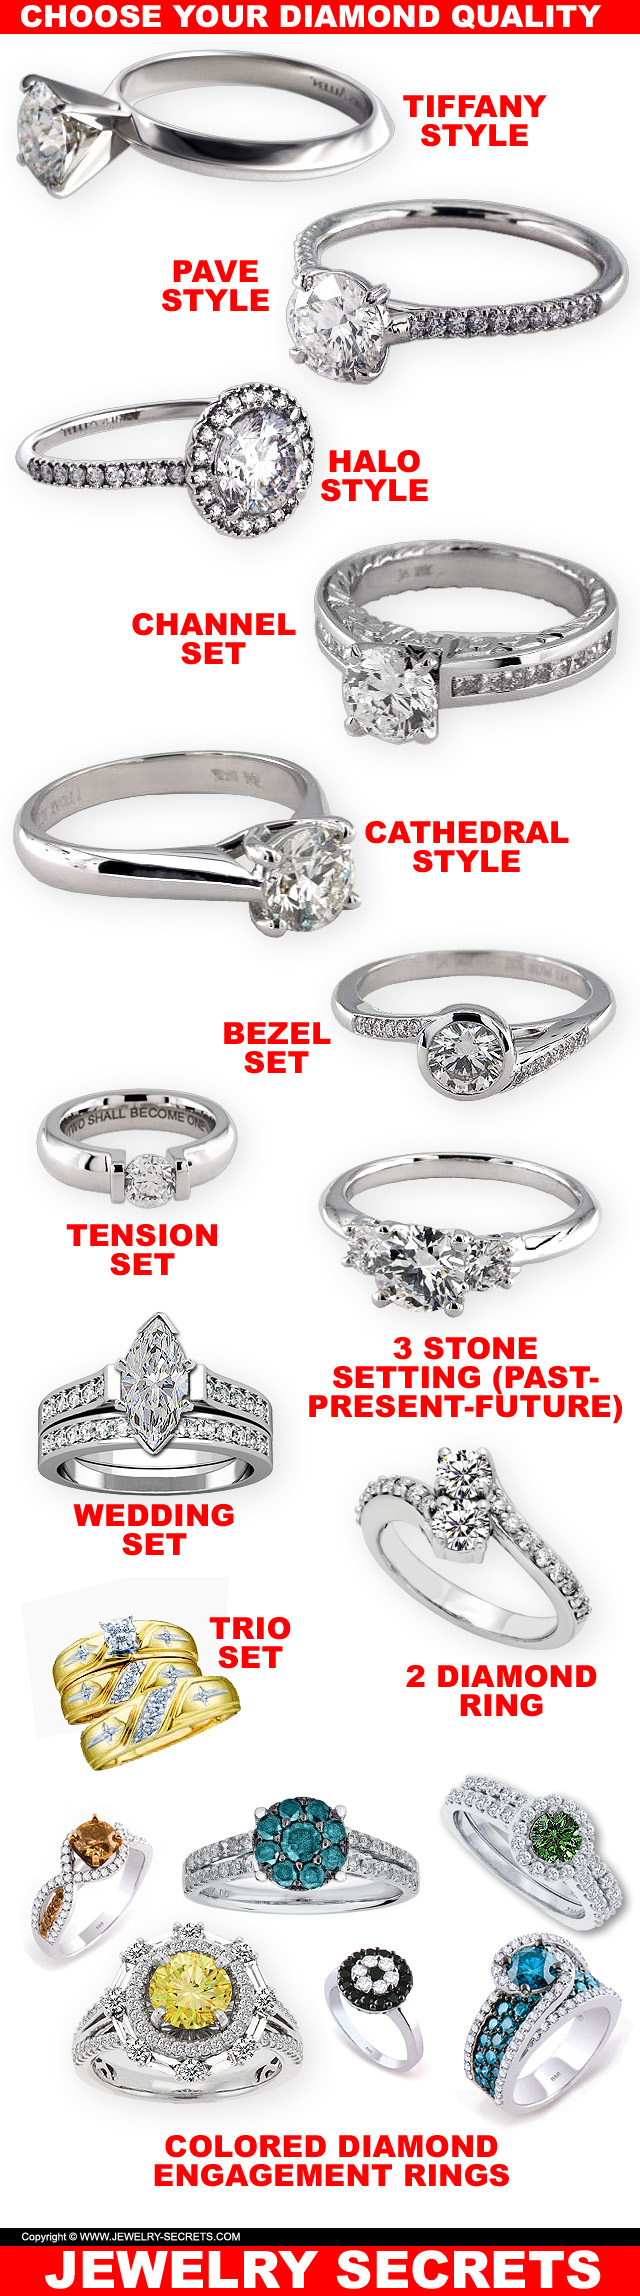 5 QUICK ENGAGEMENT RING TIPS – Jewelry Secrets